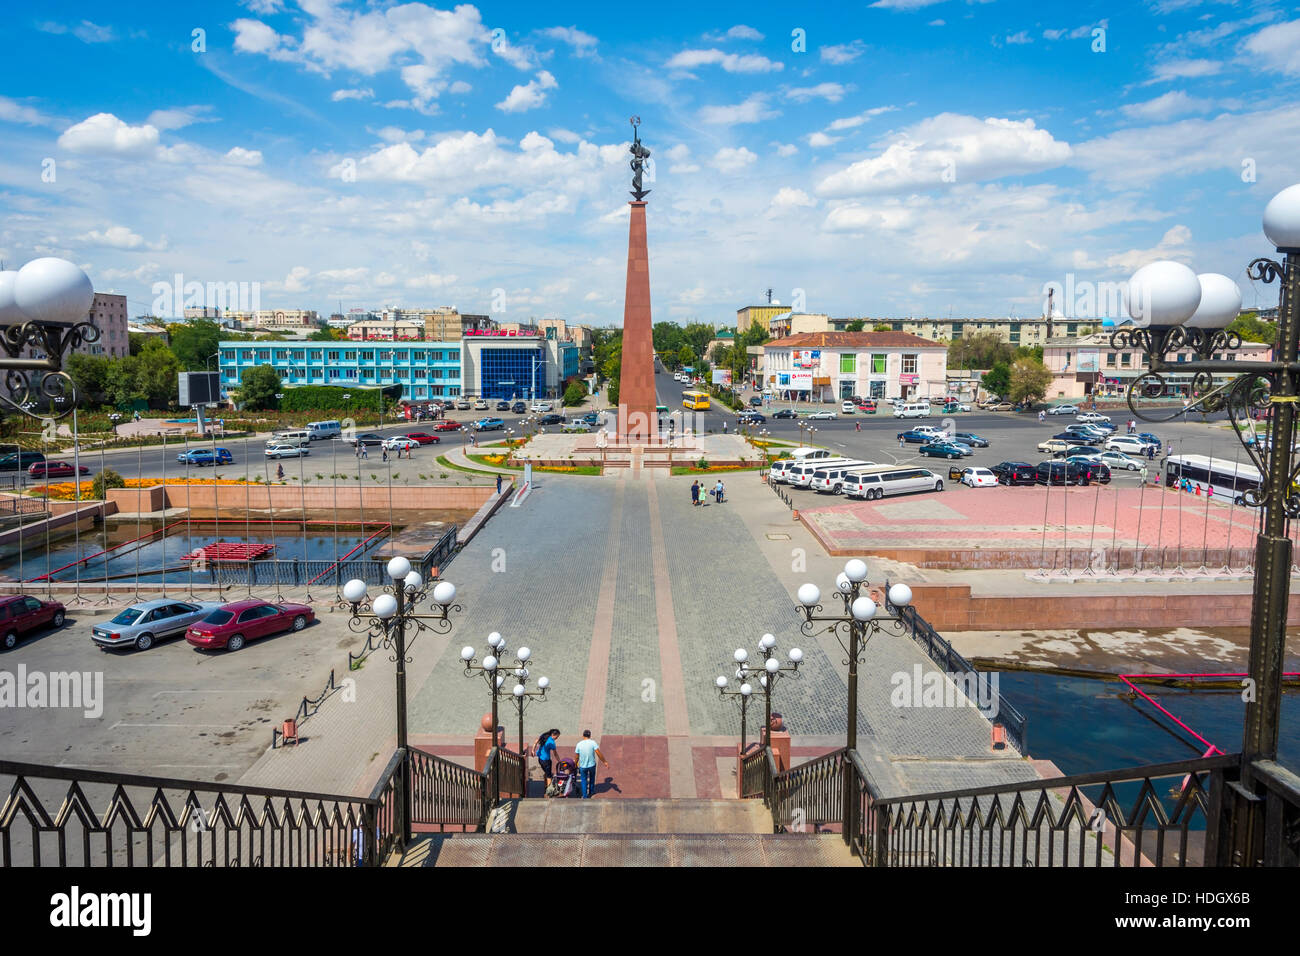 SHYMKENT, KAZAKHSTAN - JULY 19: View over Shymkent and independence park monument. July 2016 Stock Photo